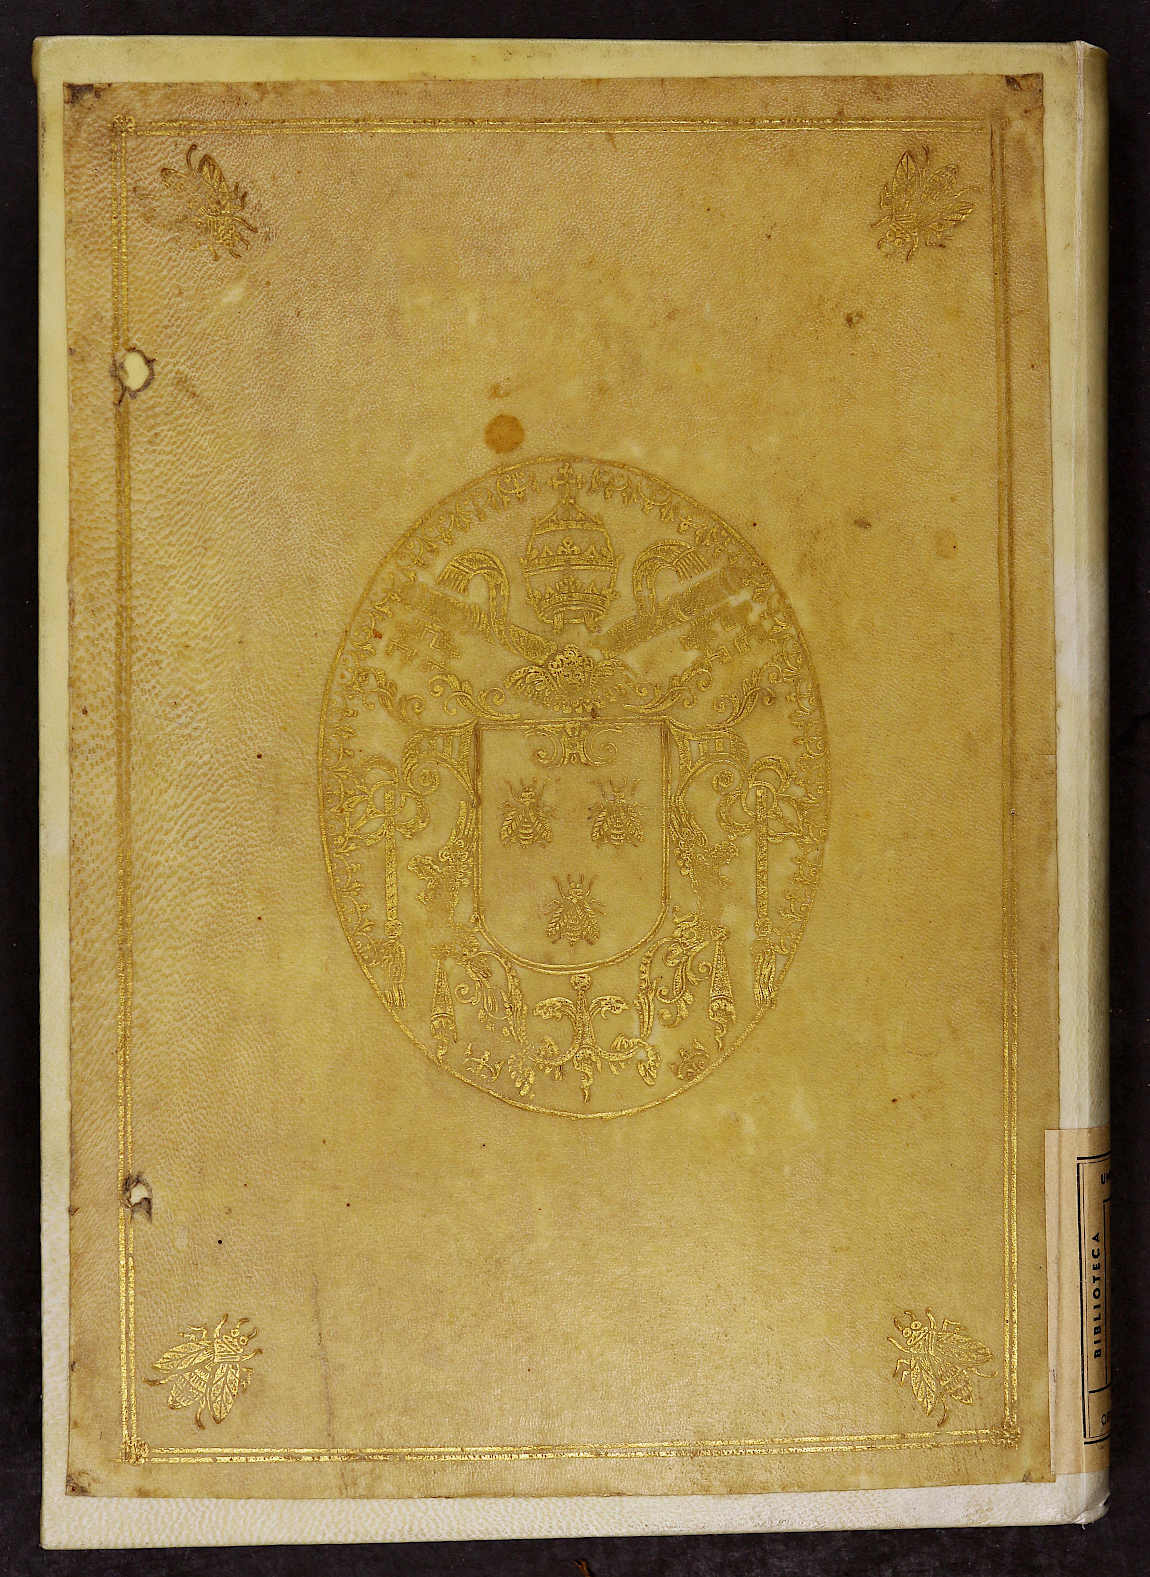 “Armorial” binding with the coat of arms of Pope Urban VIII in the center of the plates